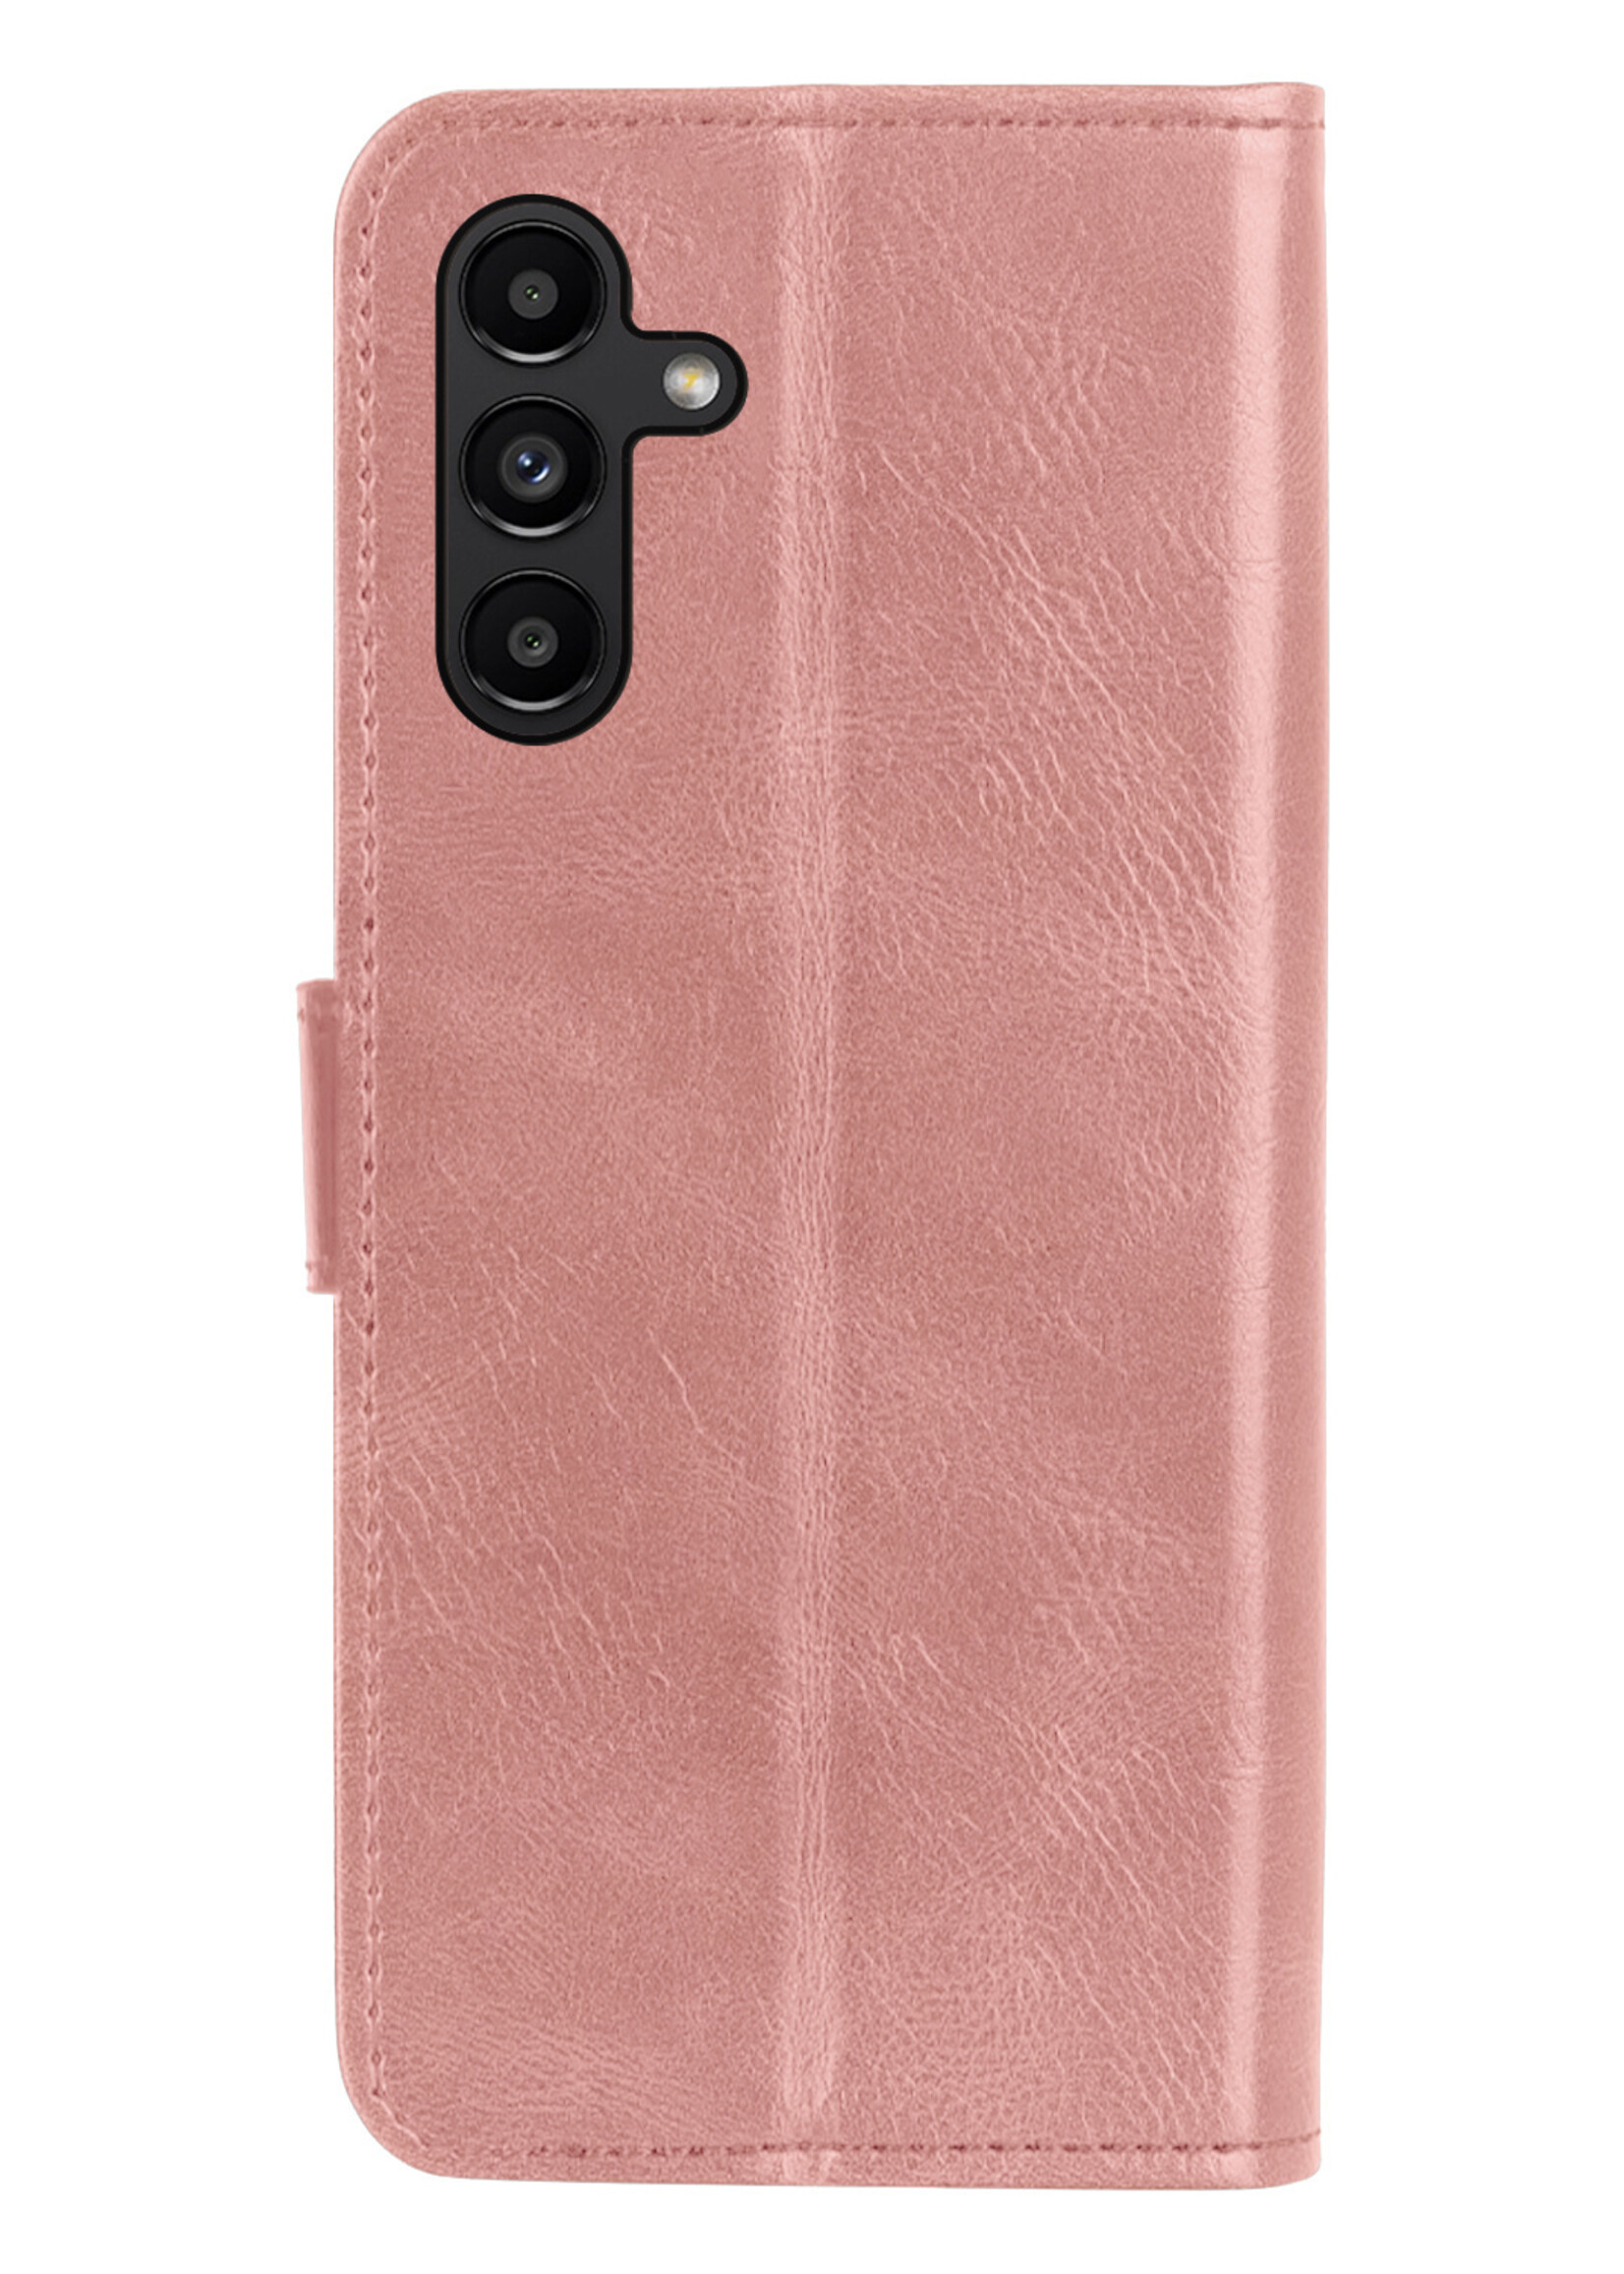 BTH Samsung A04s Hoesje Book Case Hoes Portemonnee Cover Walletcase - Samsung A04s Hoes Bookcase Hoesje - Rose Goud